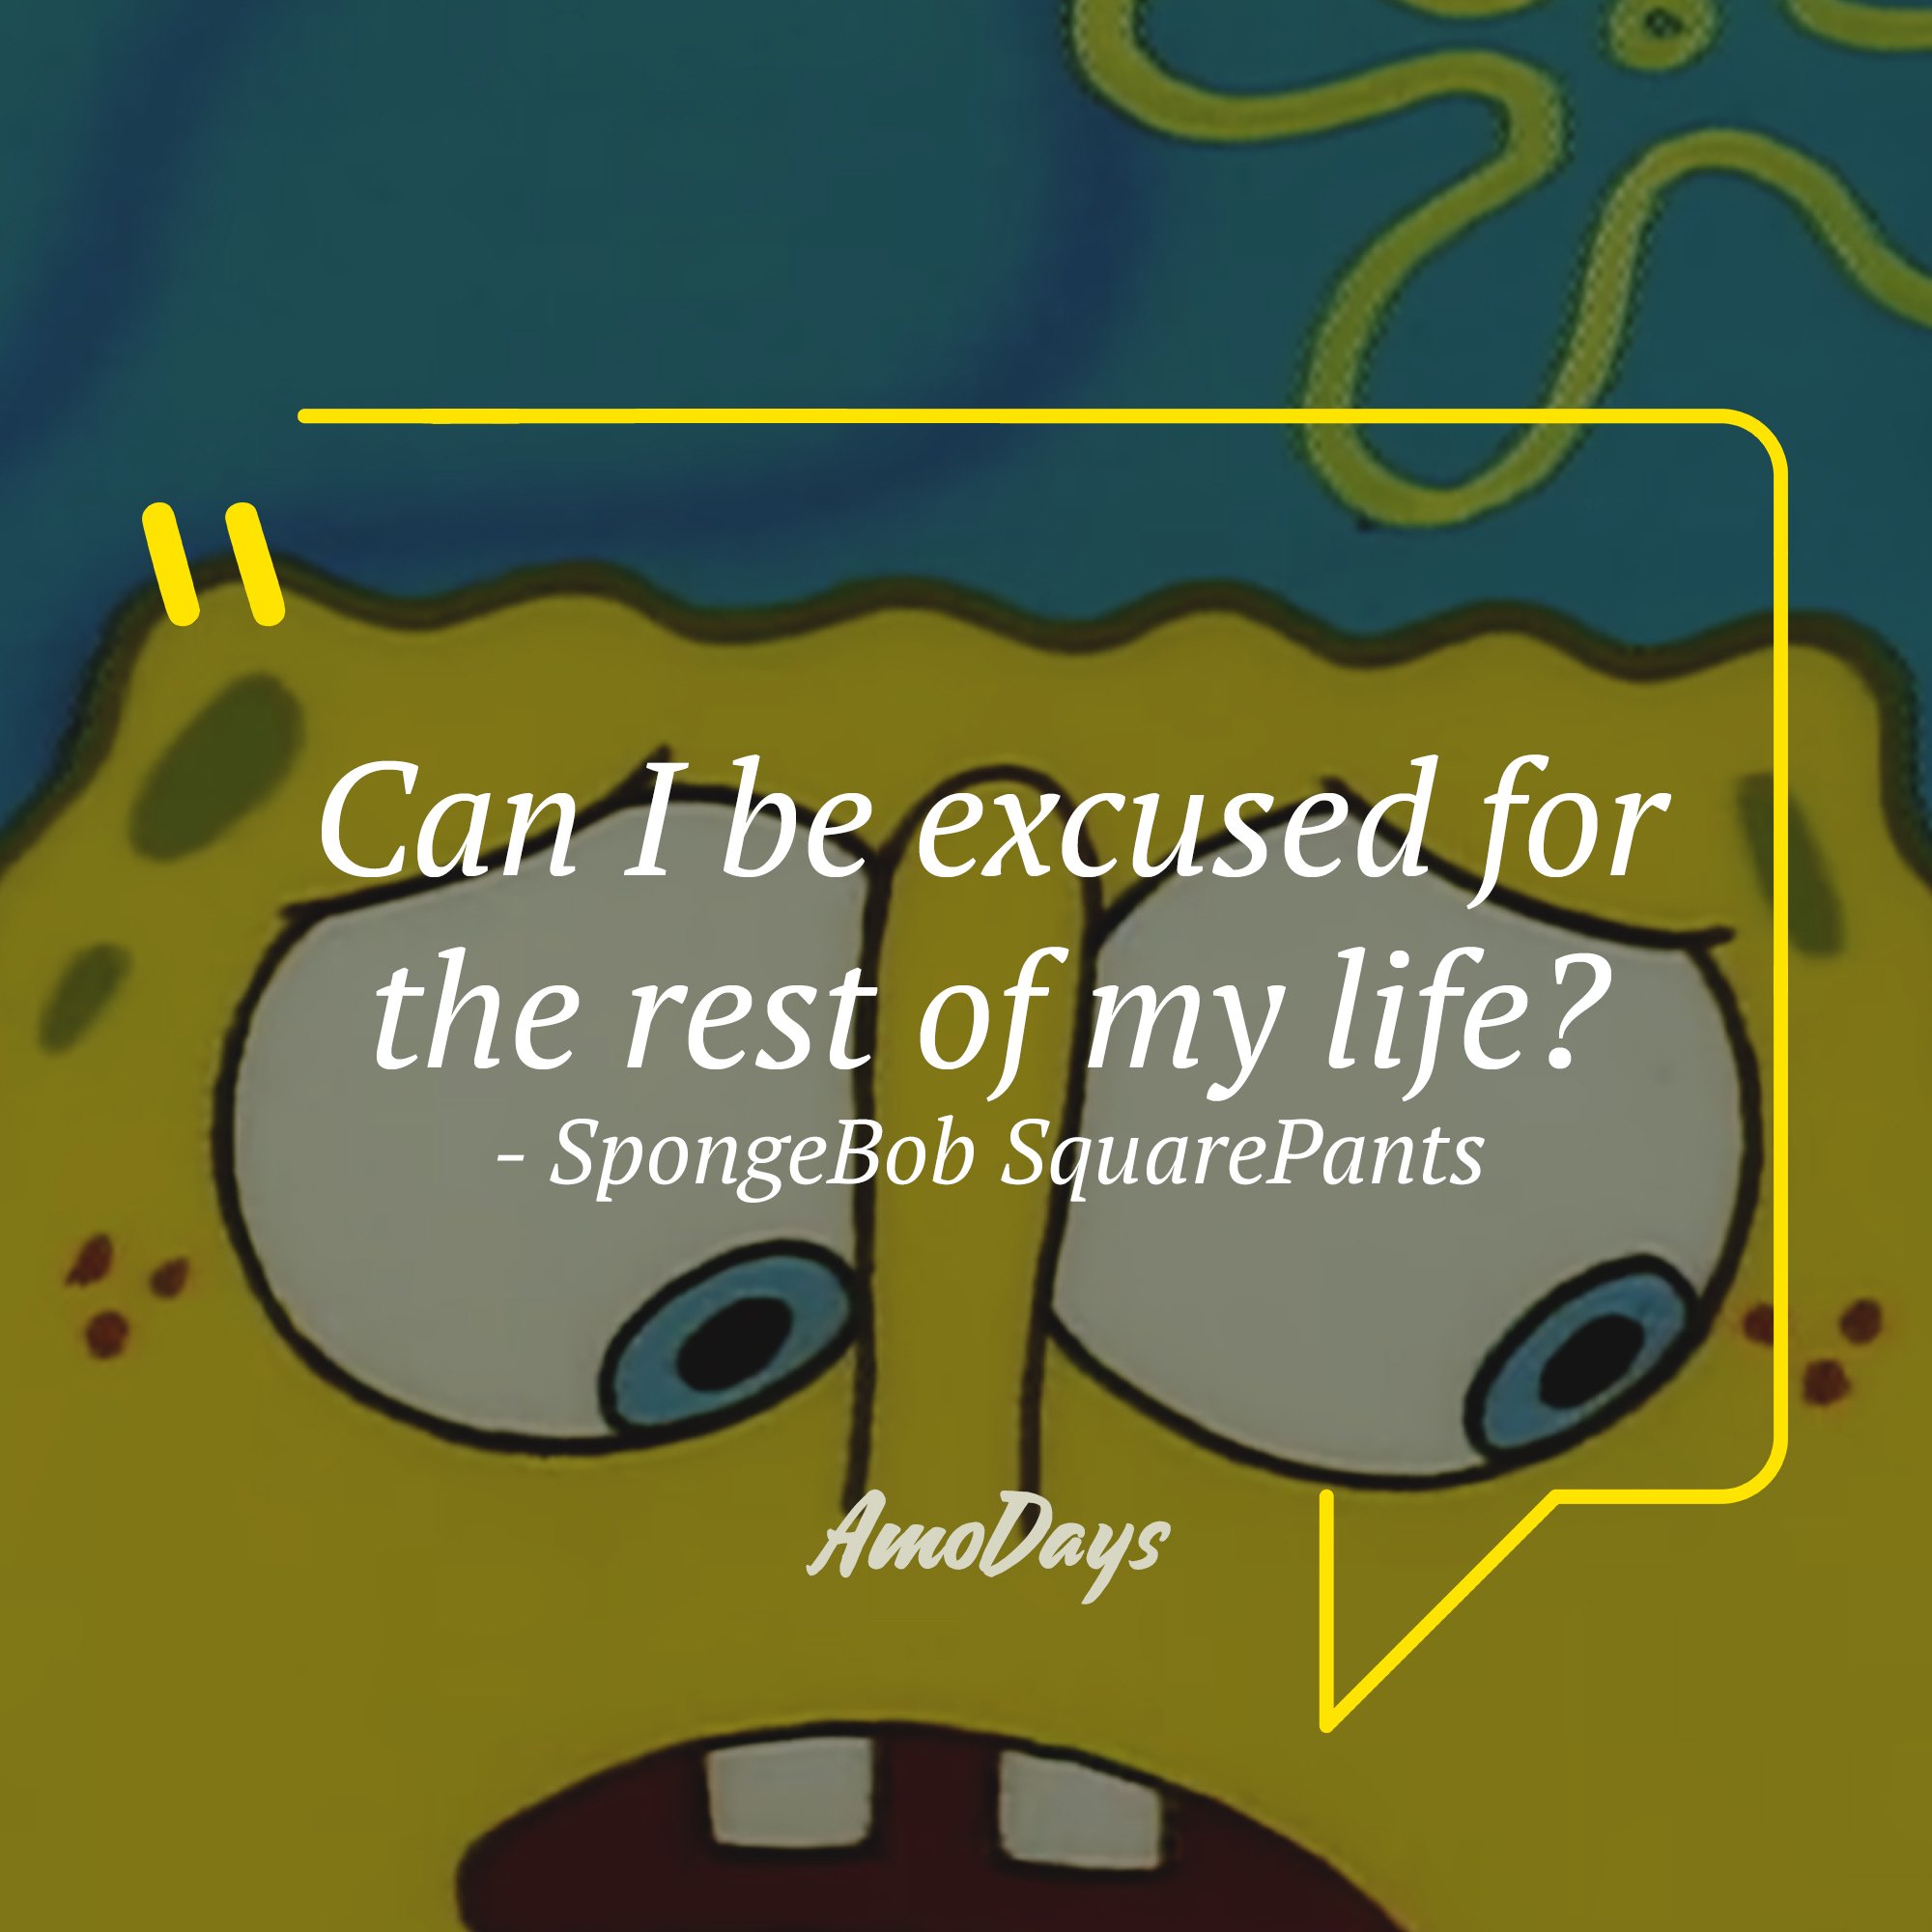 SpongeBob SquarePants's quote: "Can I be excused for the rest of my life?" | Source: AmoDays 